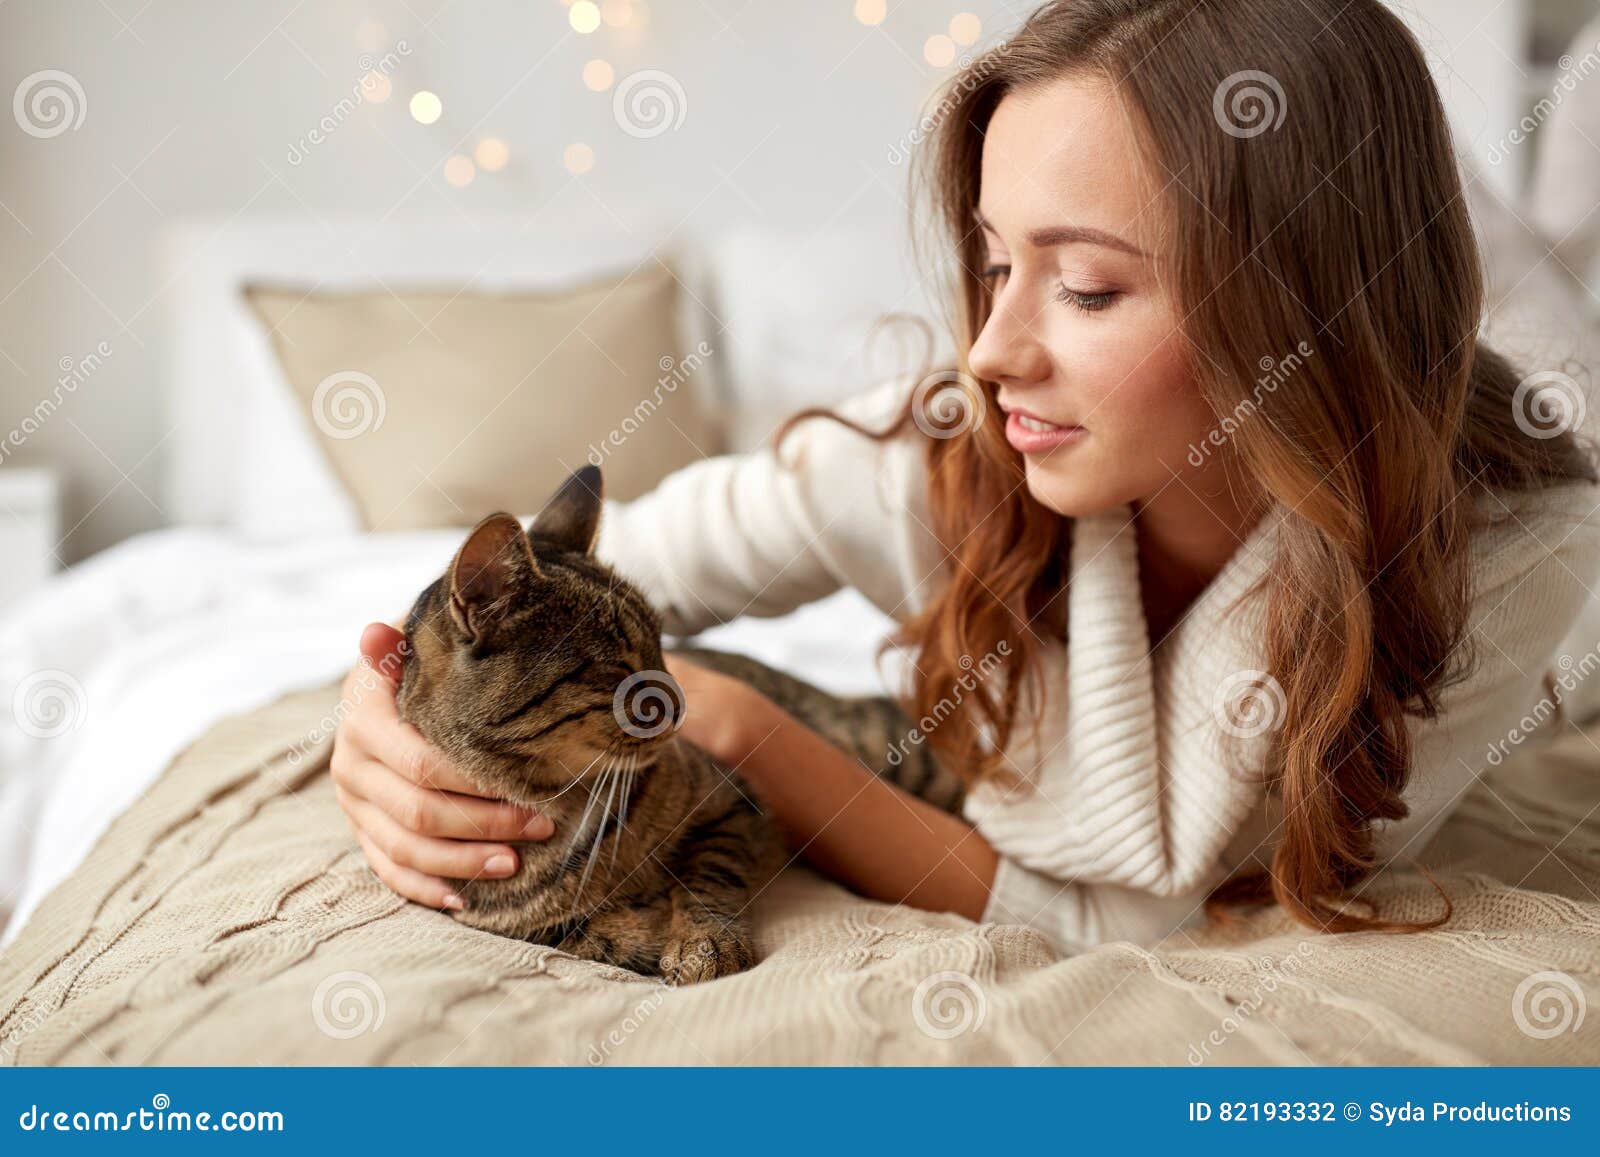 Happy Young Woman with Cat Lying in Bed at Home Stock Photo - Image of ...